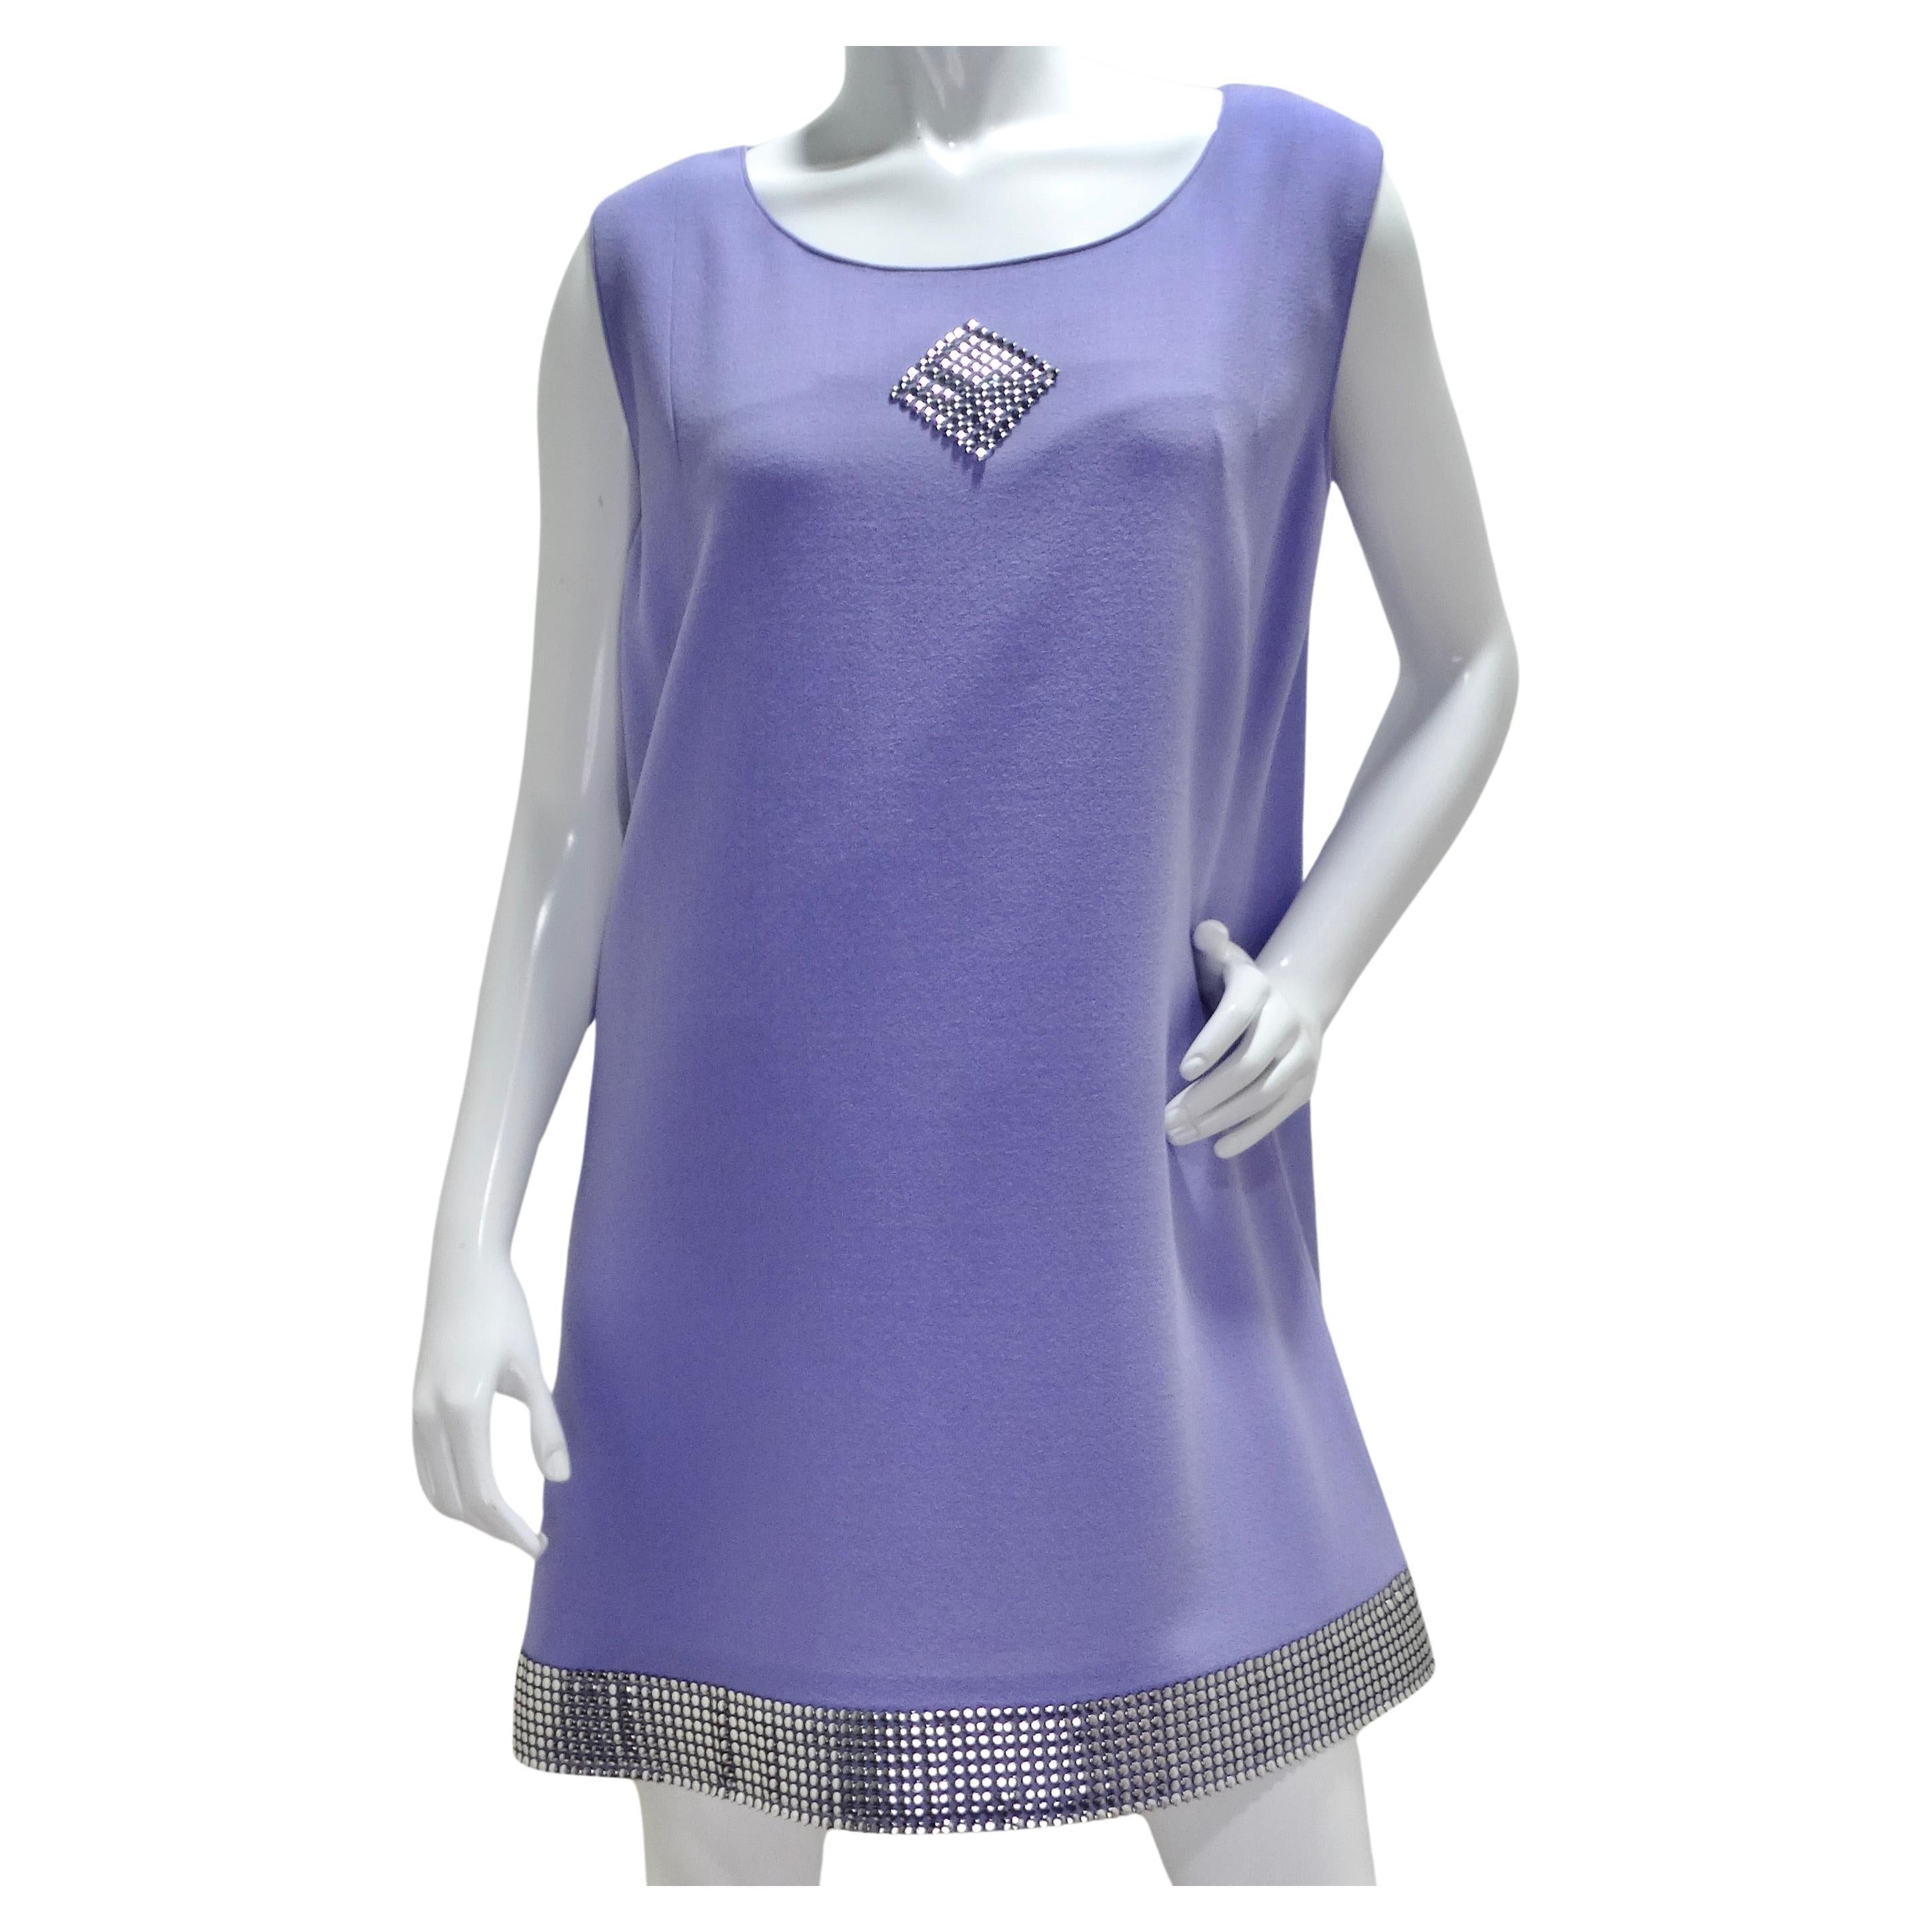 Introducing the Pierre Cardin Lavender Studded Dress, a vibrant and bold statement piece that exudes modern elegance with a vintage-inspired twist. This classic straight-cut mid-length dress in a stunning shade of purple is a true showstopper,